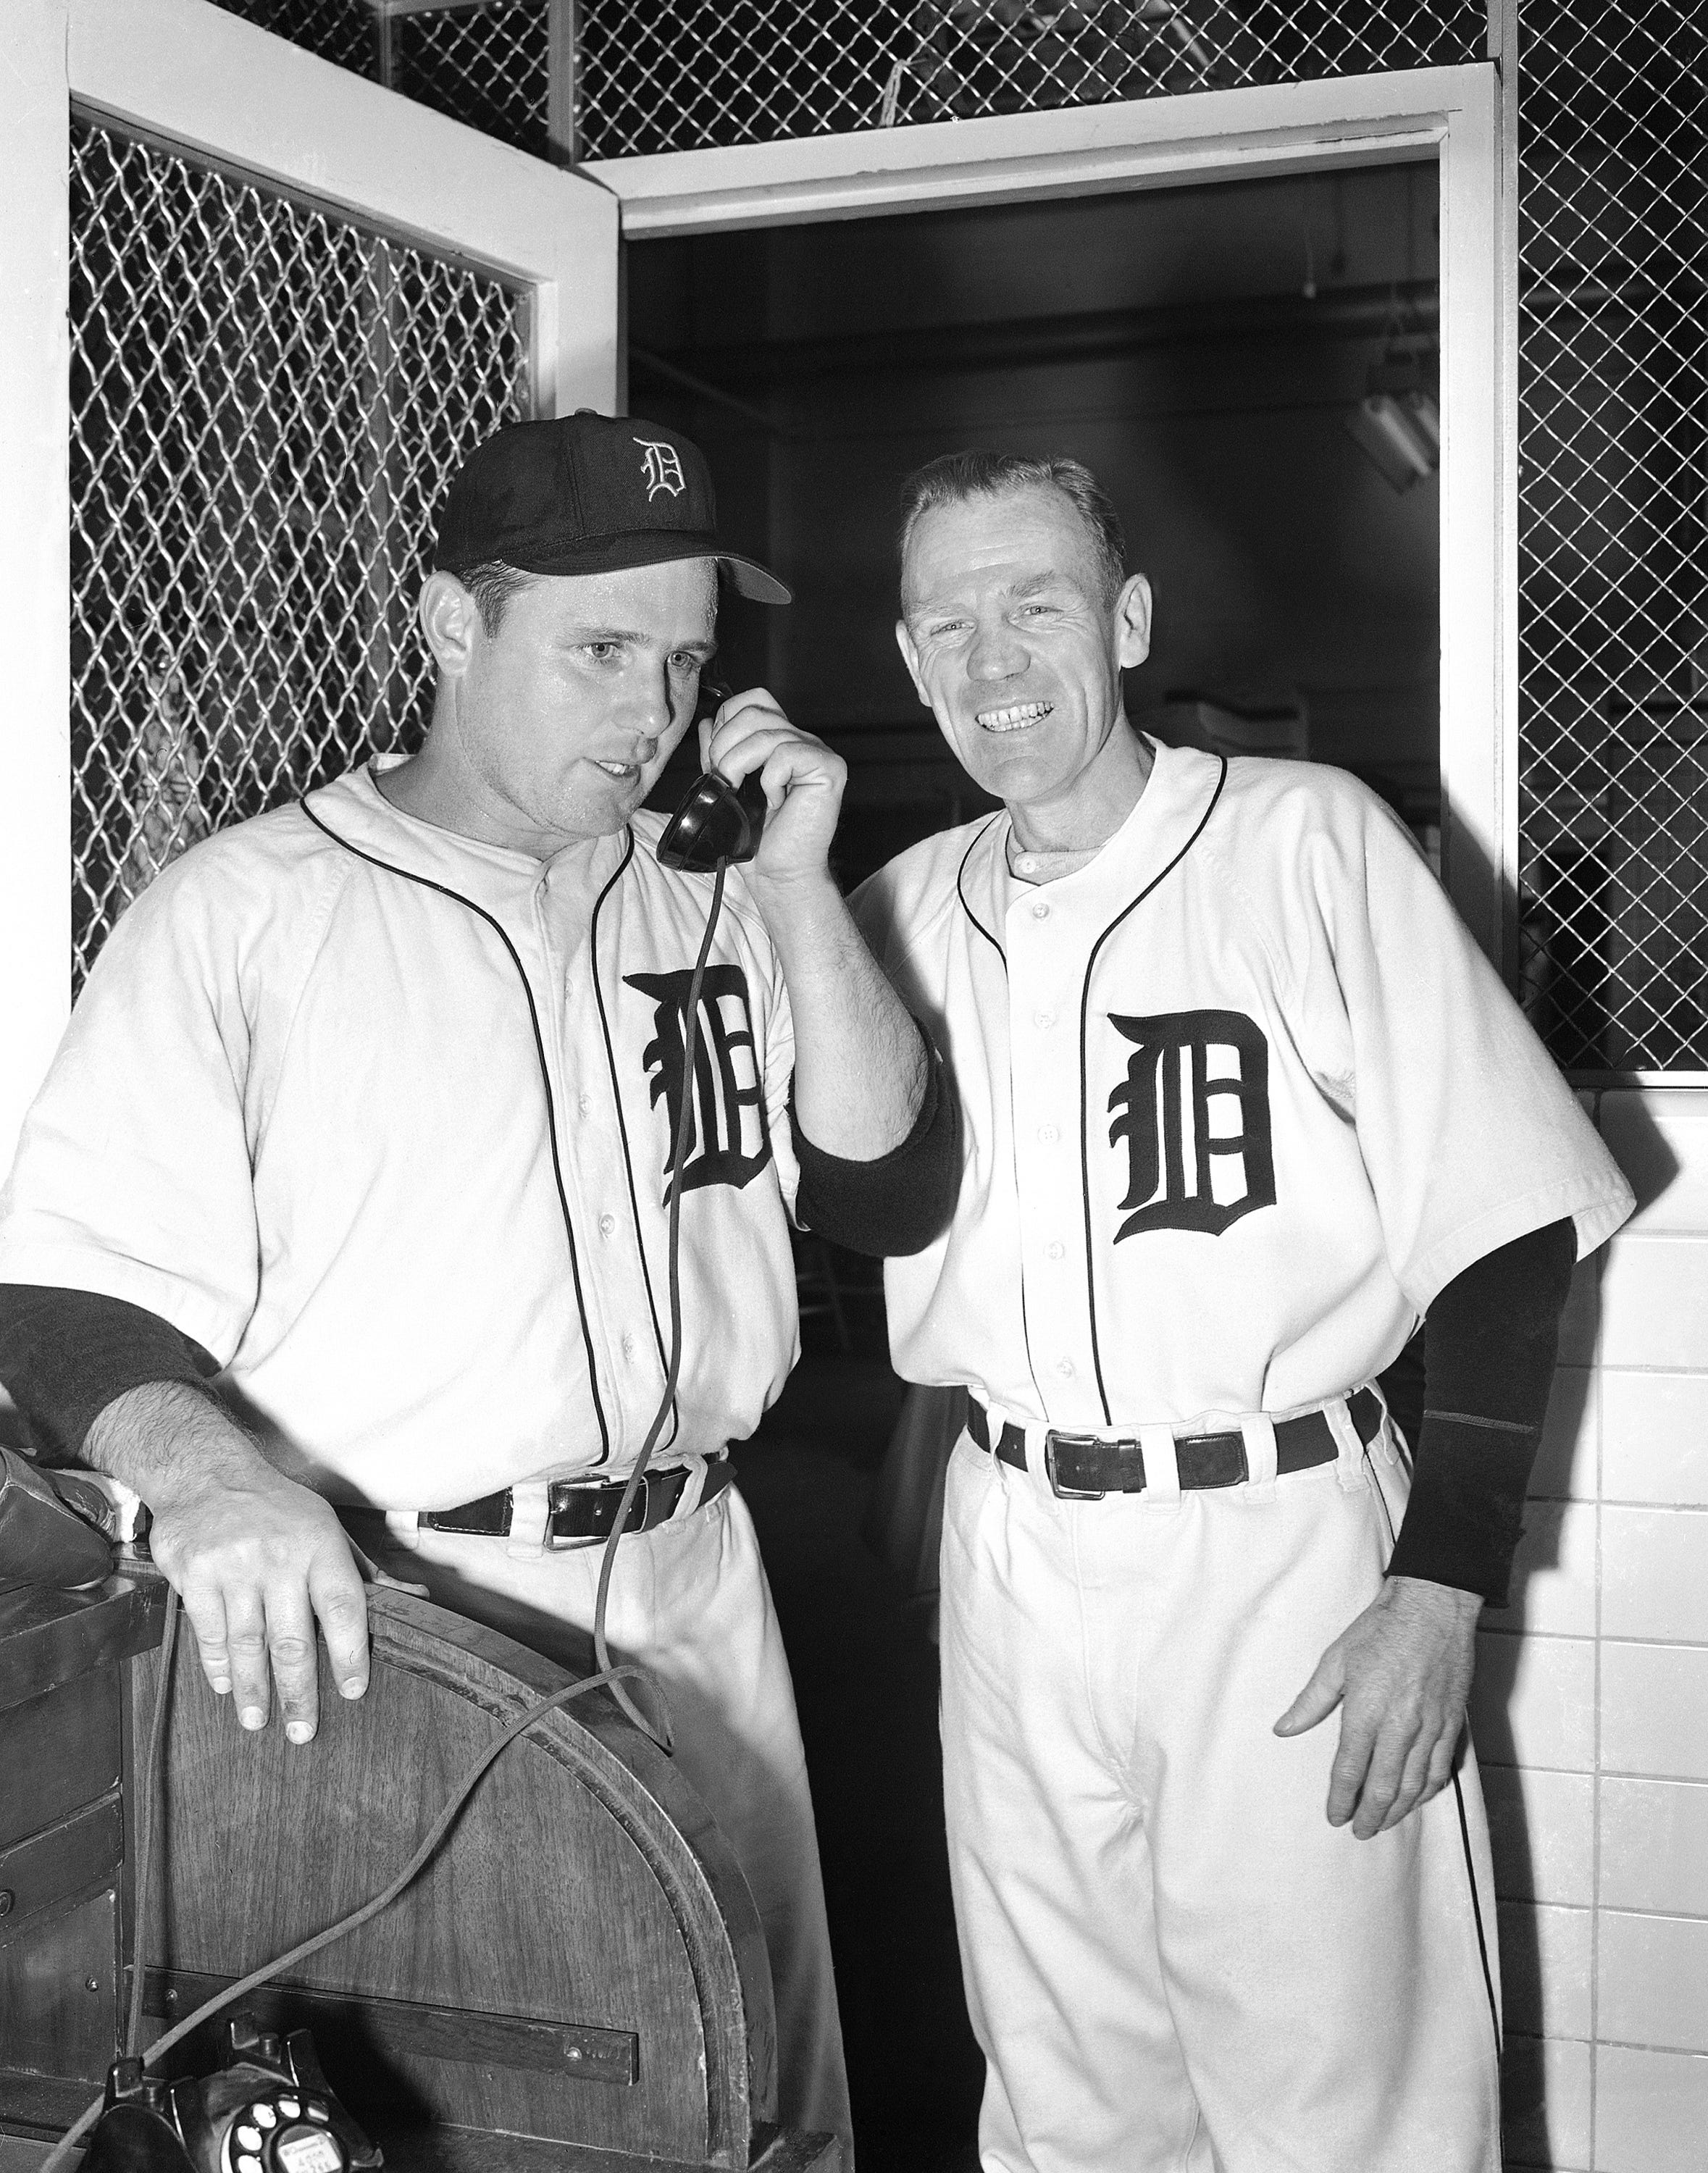 Virgil Trucks (left), May 15, 1952: It would take nearly 40 years for the Tigers to toss their second no-hitter, when Trucks shut down the Washington Senators, 1-0. Trucks allowed a lone walk and struck out seven in the victory, which was secured on Vic Wertz's home run with two outs in the bottom of the ninth.